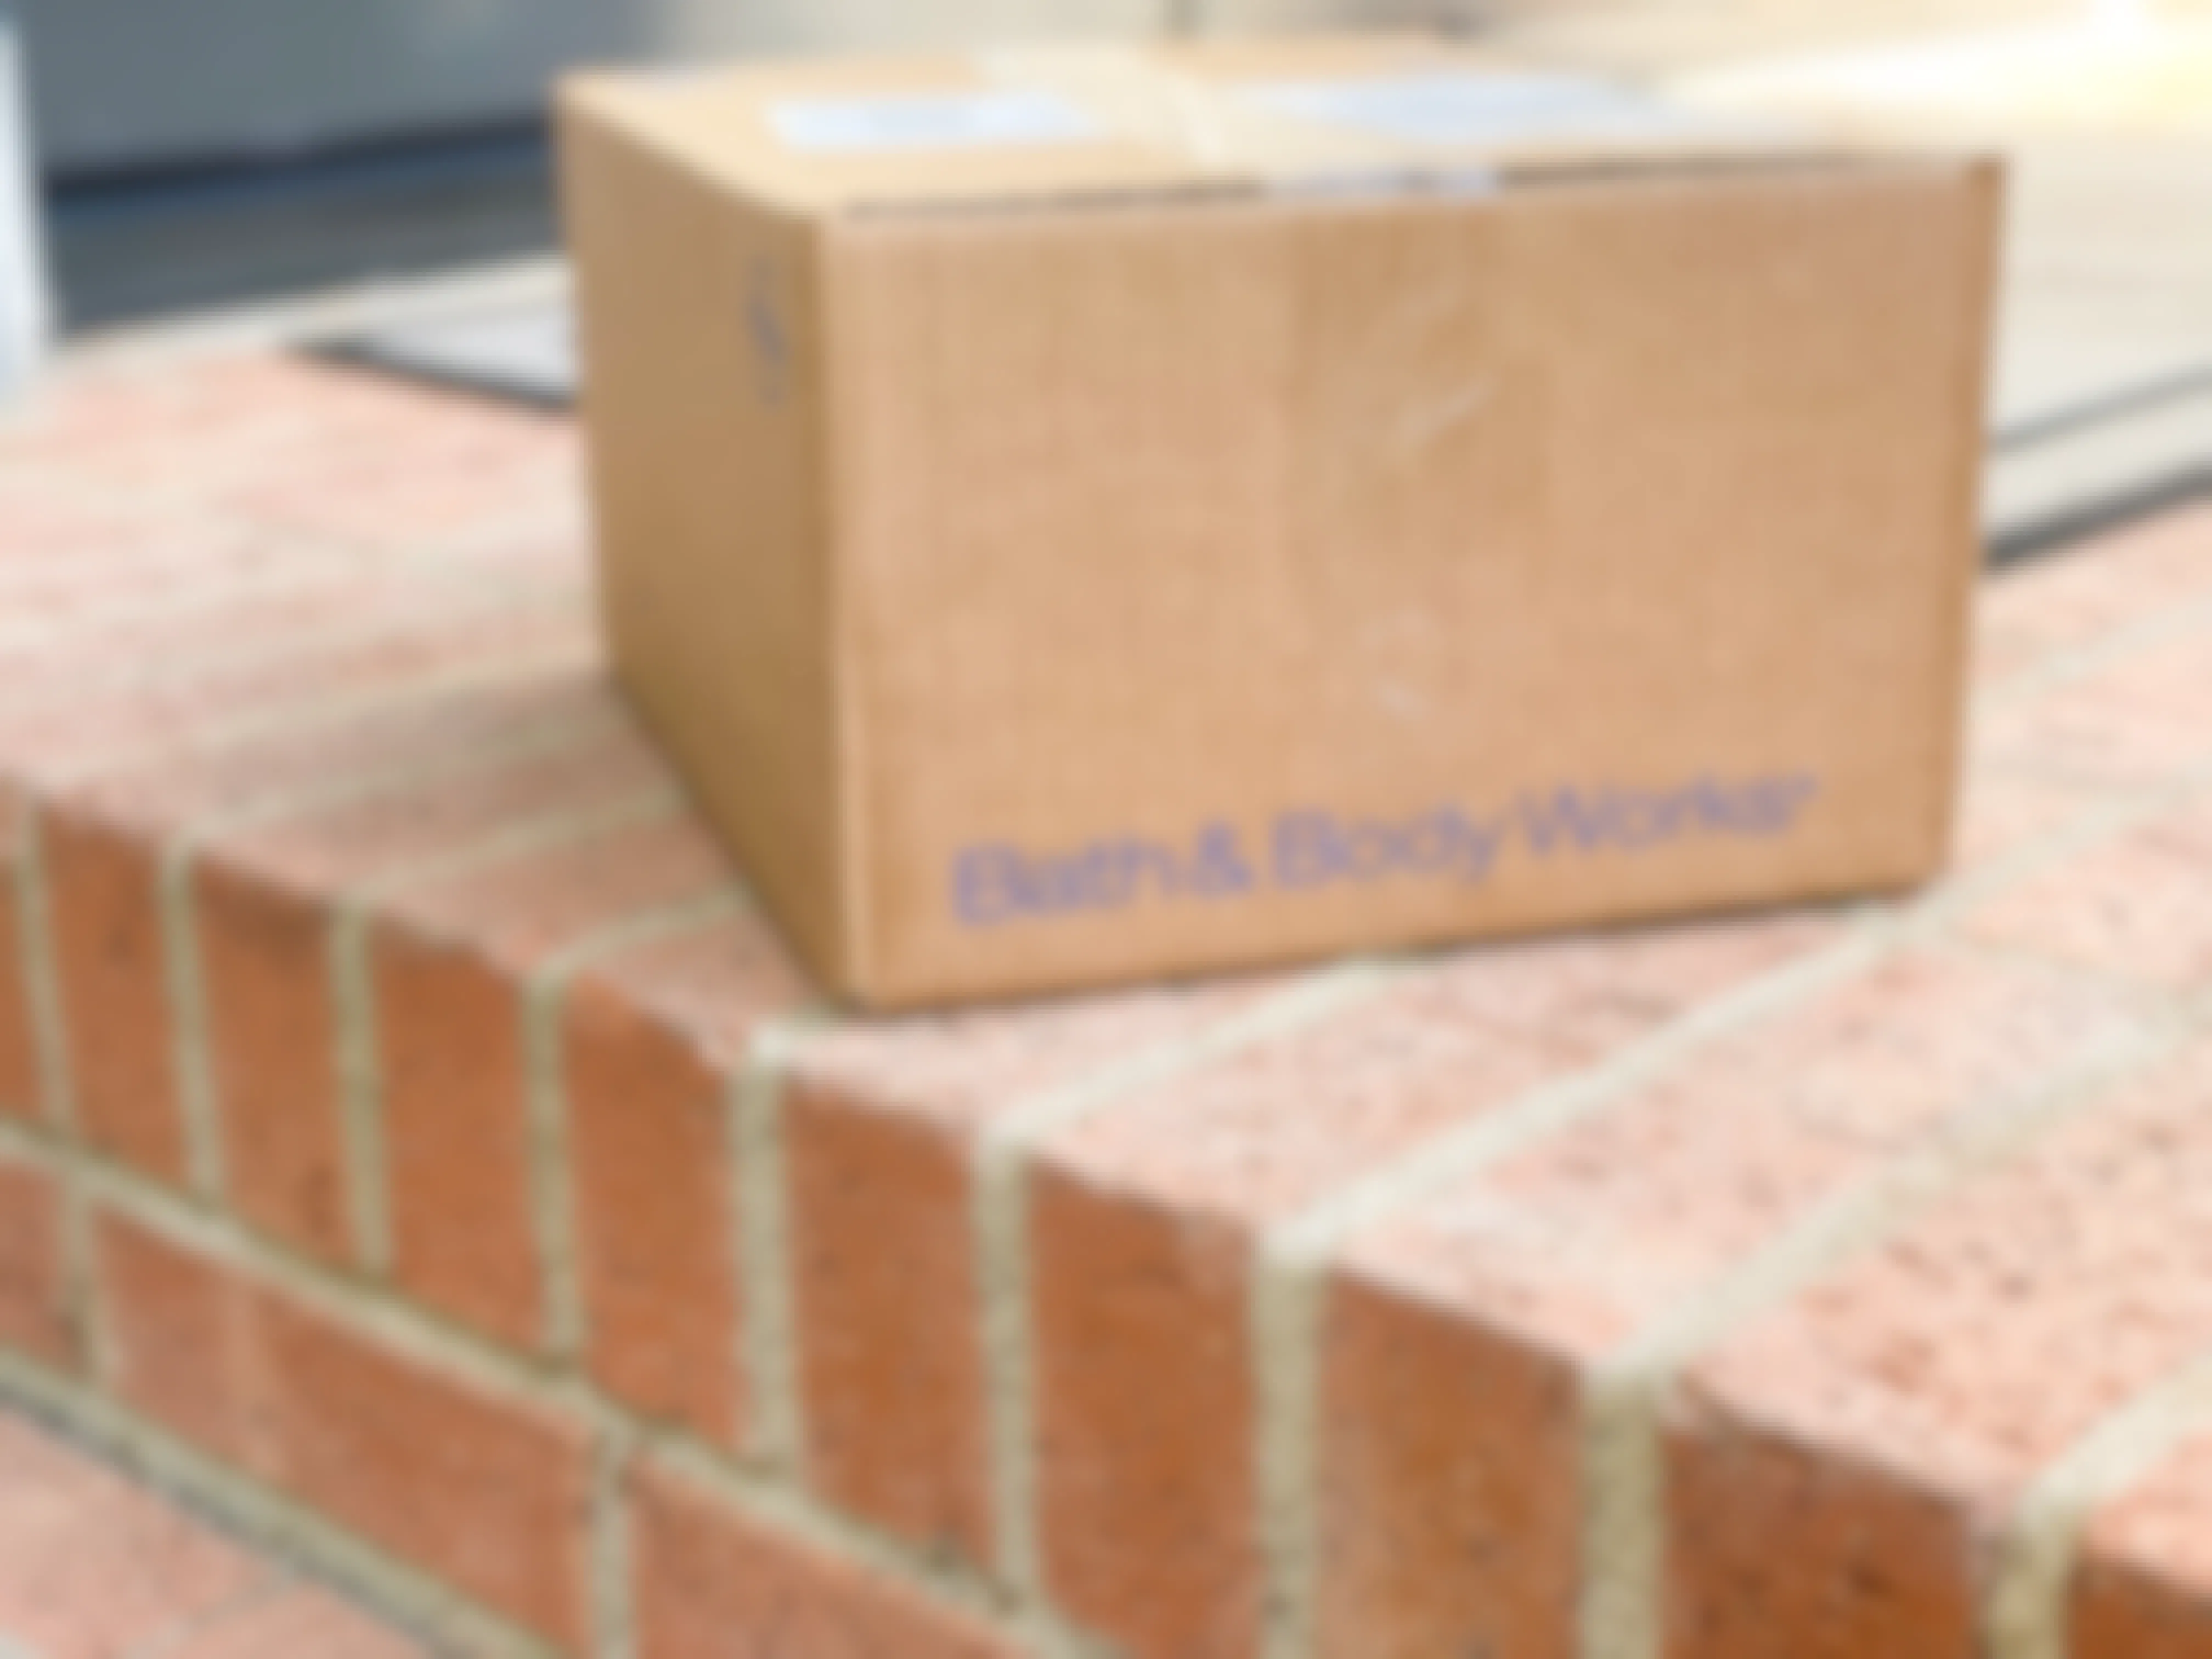 bath and body works shipping box on front step